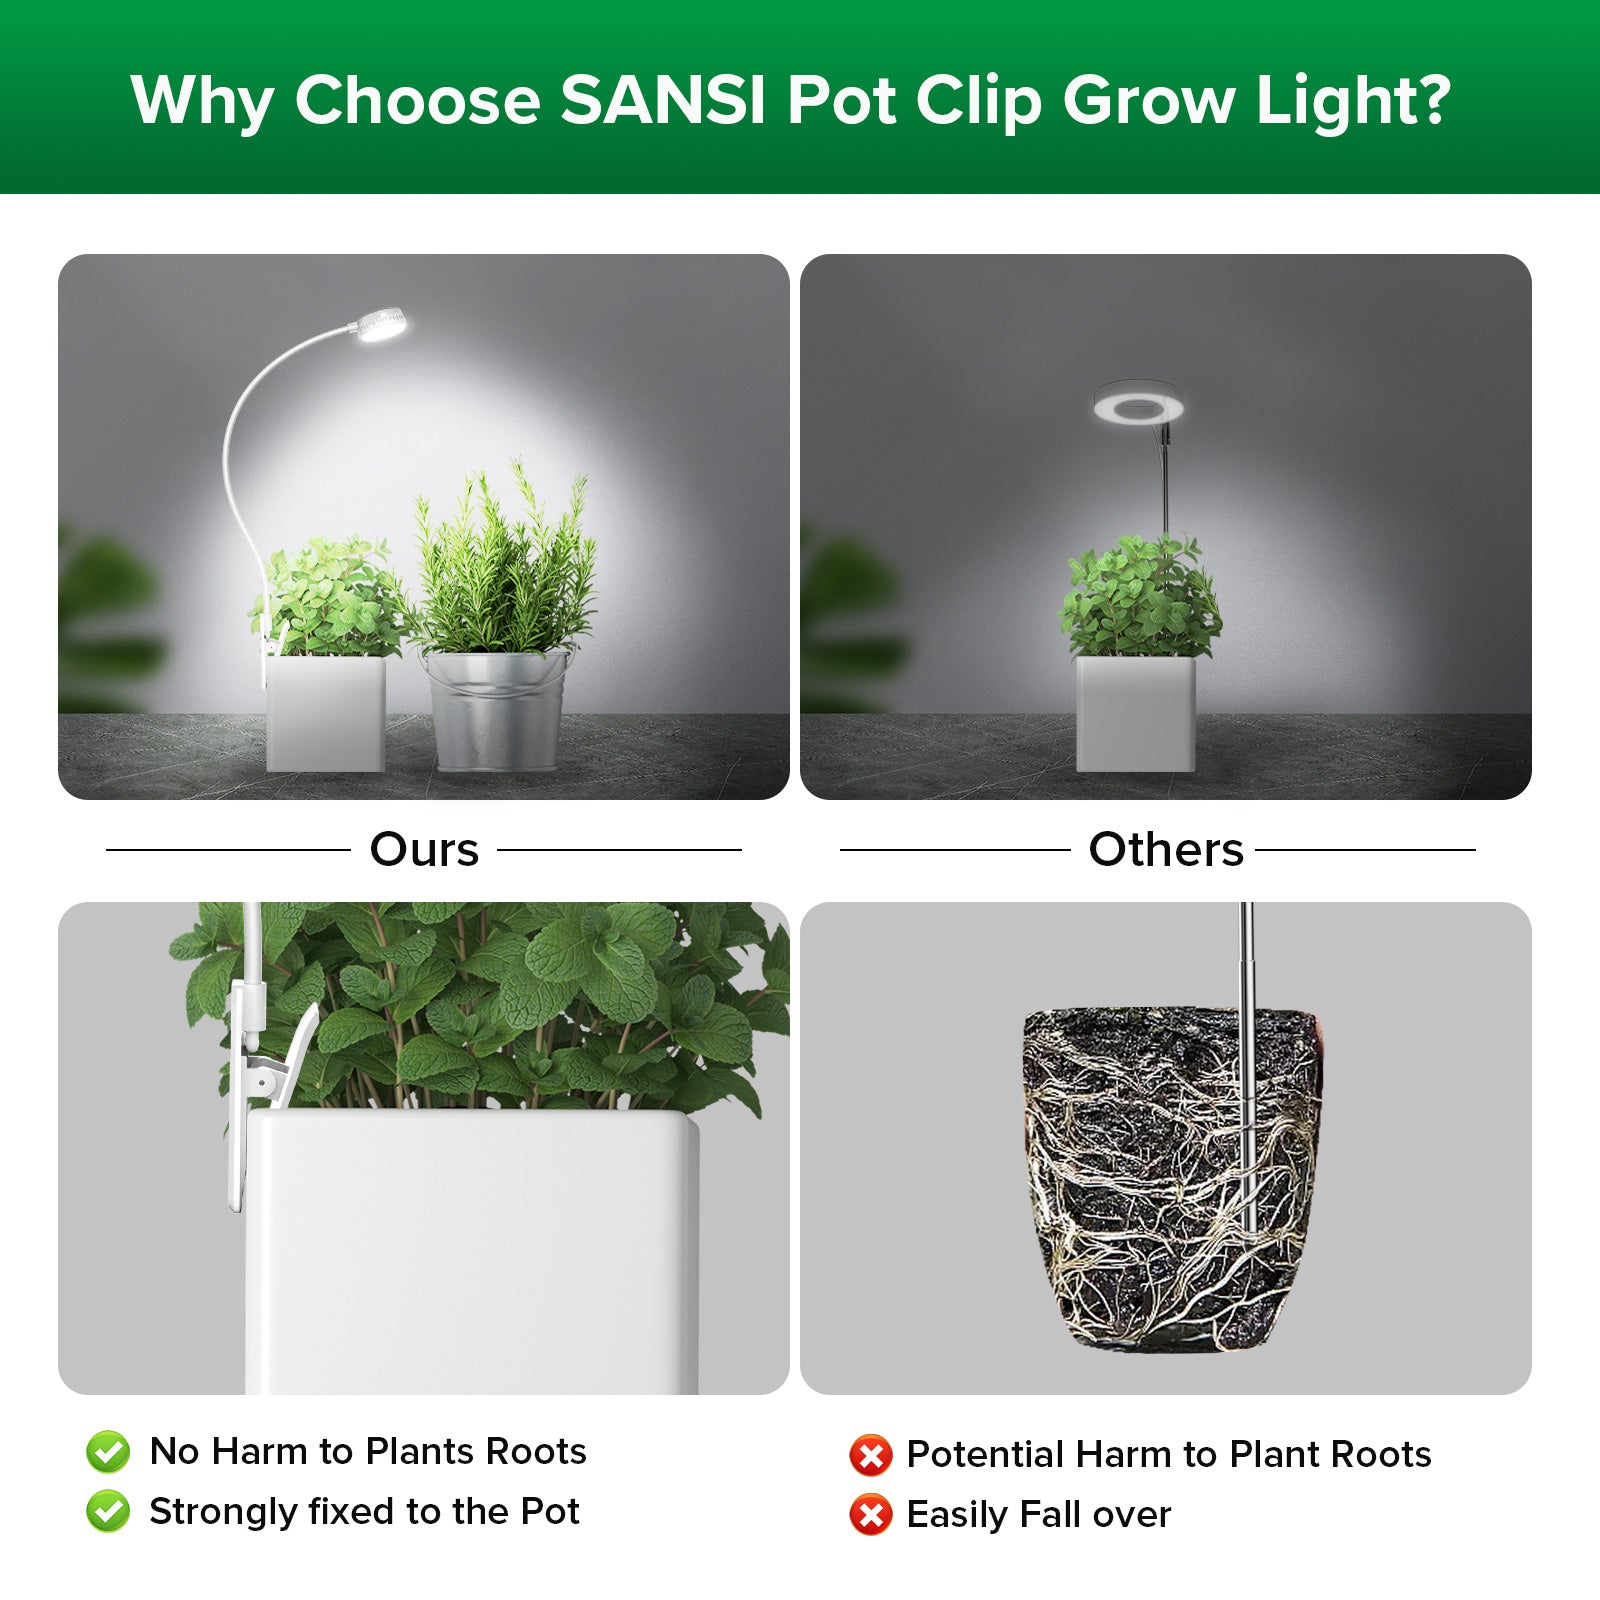 Pot Clip LED Grow Light does harmless to plants roots and strongly fixed to the pot.